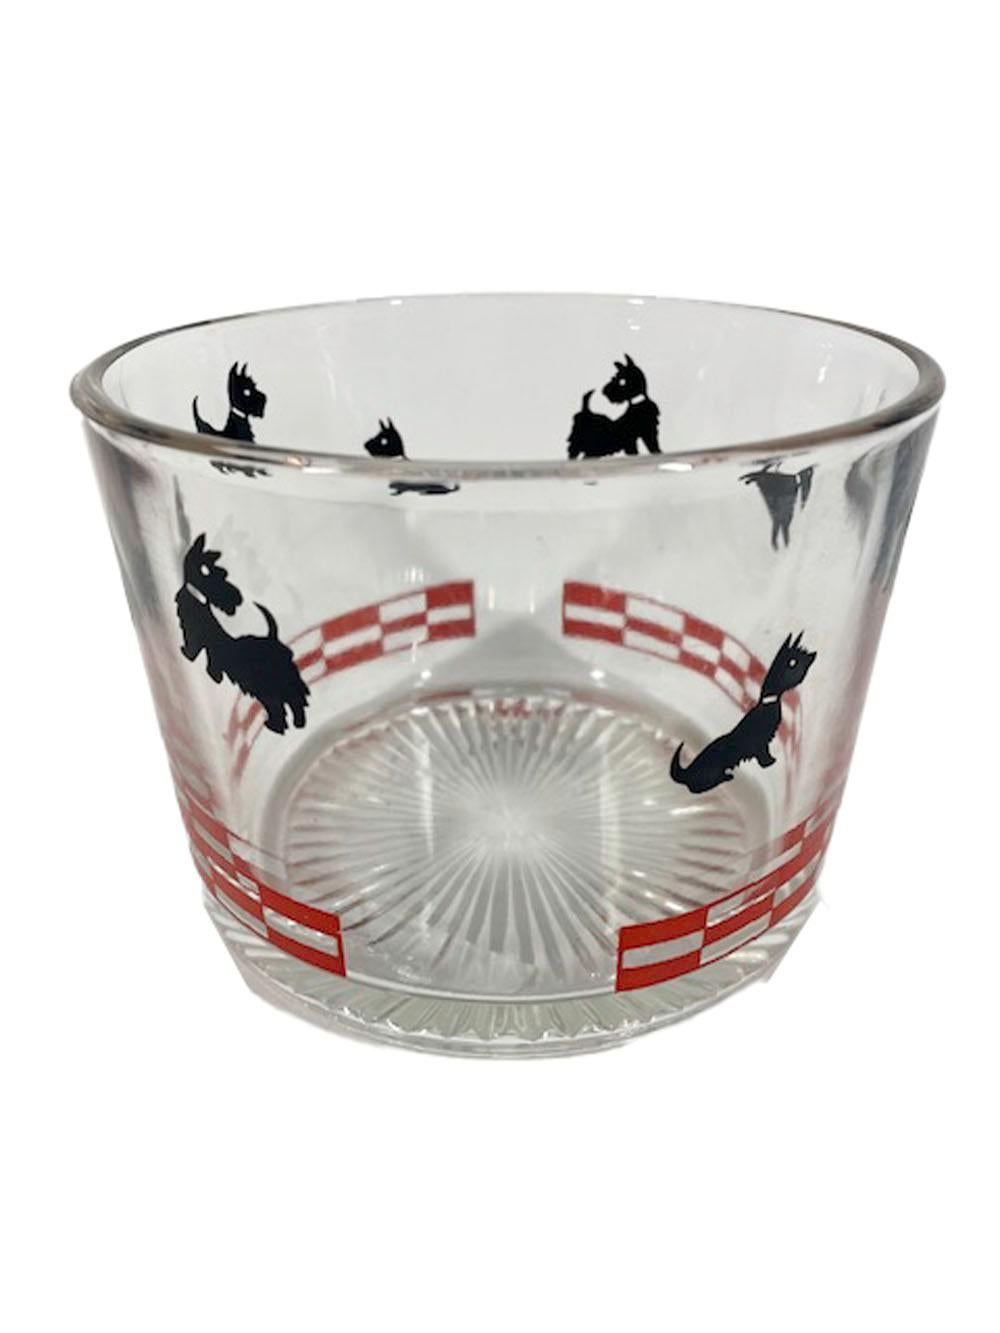 Art Deco ice bowl by Hazel-Atlas with molded bottom and decorated around the sides with black Scottish Terriers in various poses above a band of red checks.